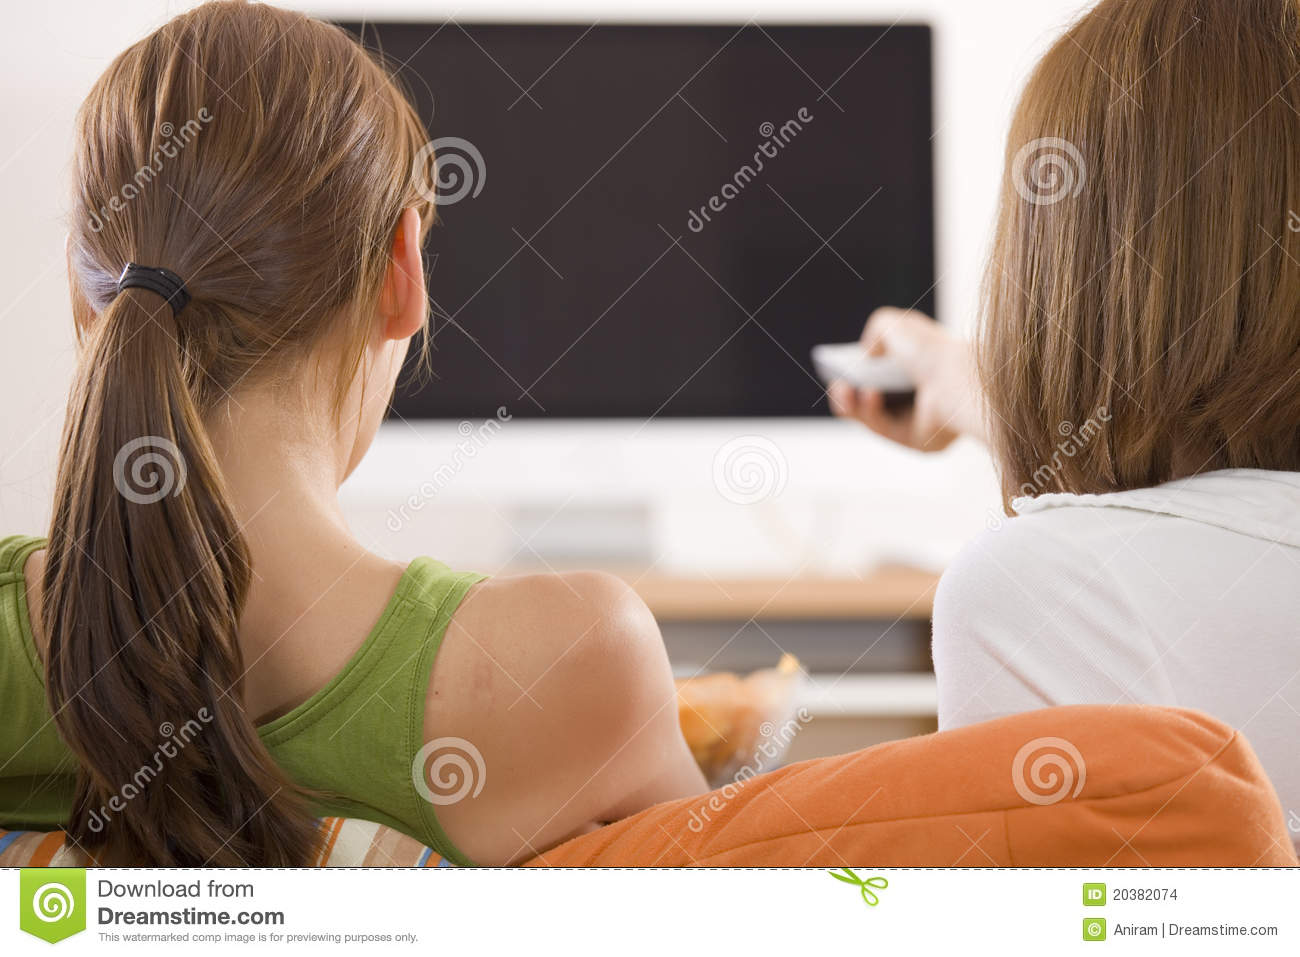 Two Women Watching Television Stock Images   Image  20382074